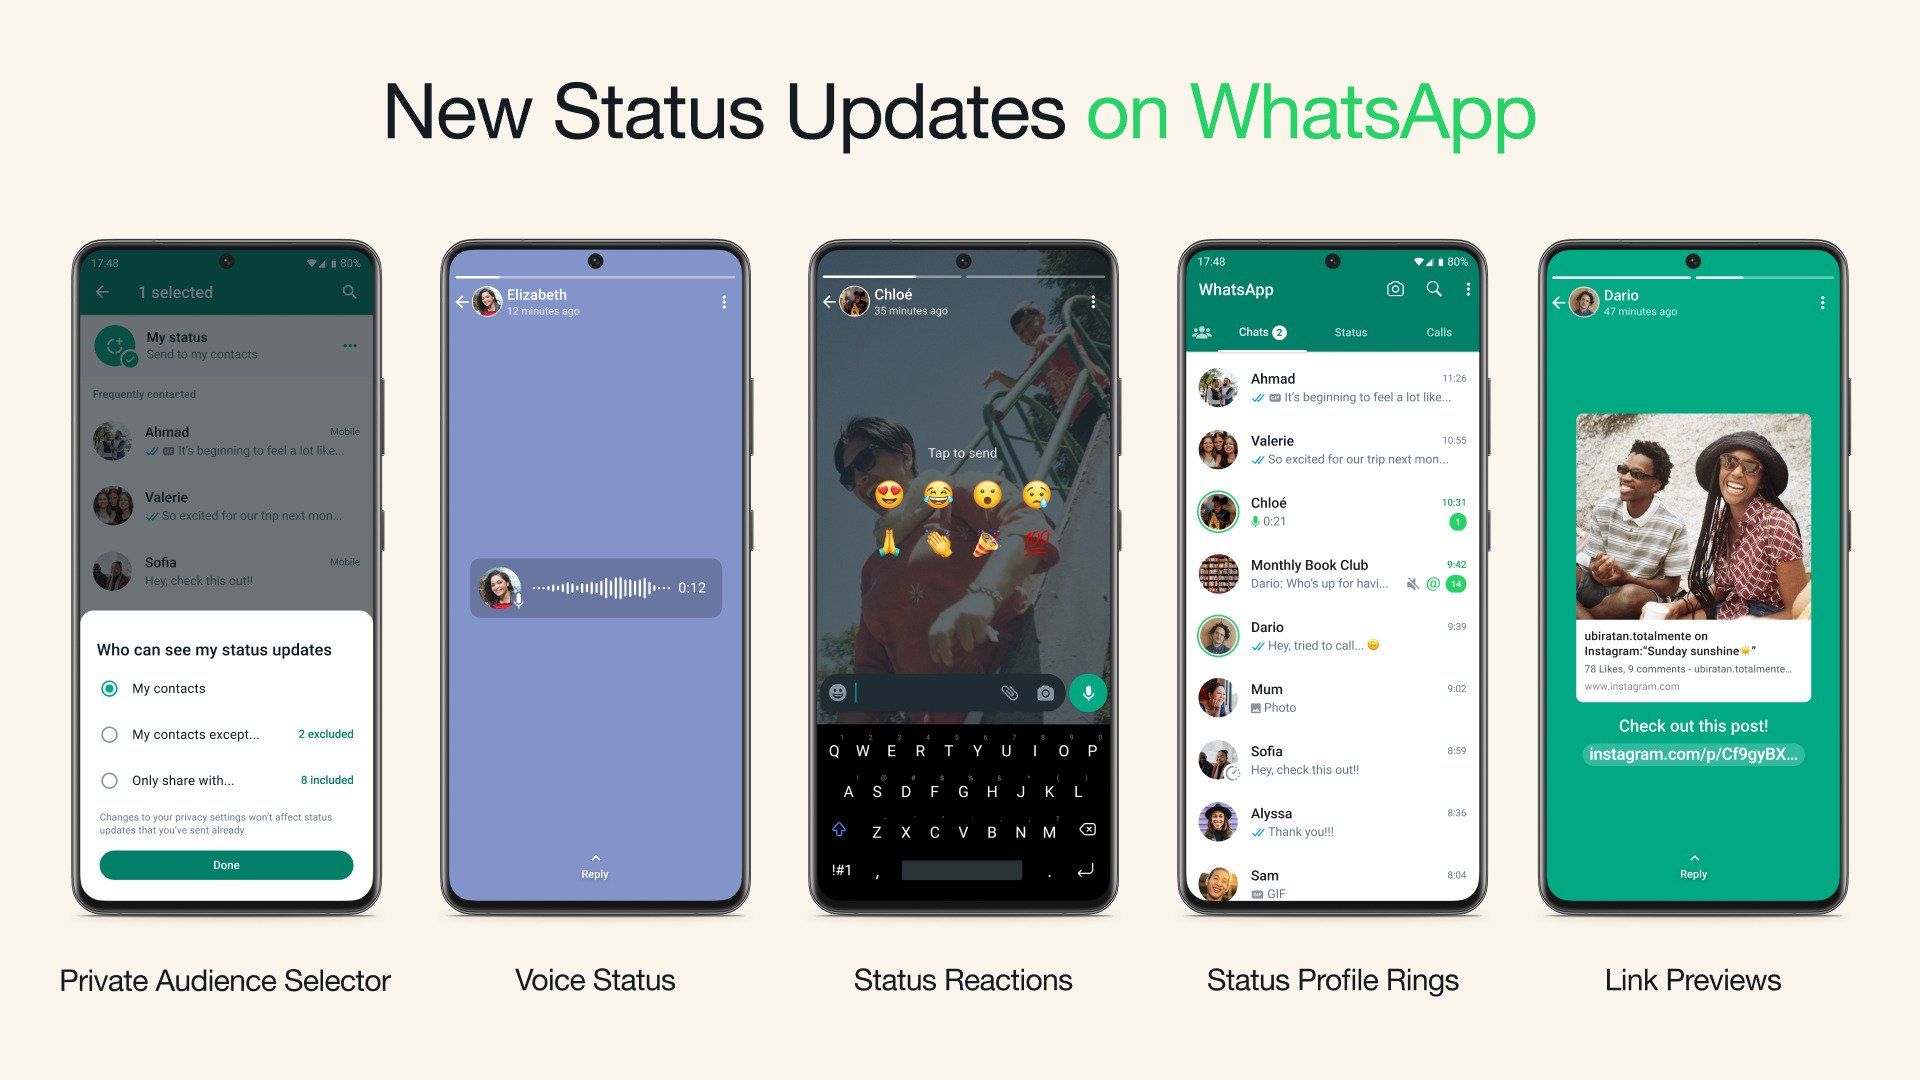 Now WhatsApp Allows Direct Status Sharing on Facebook